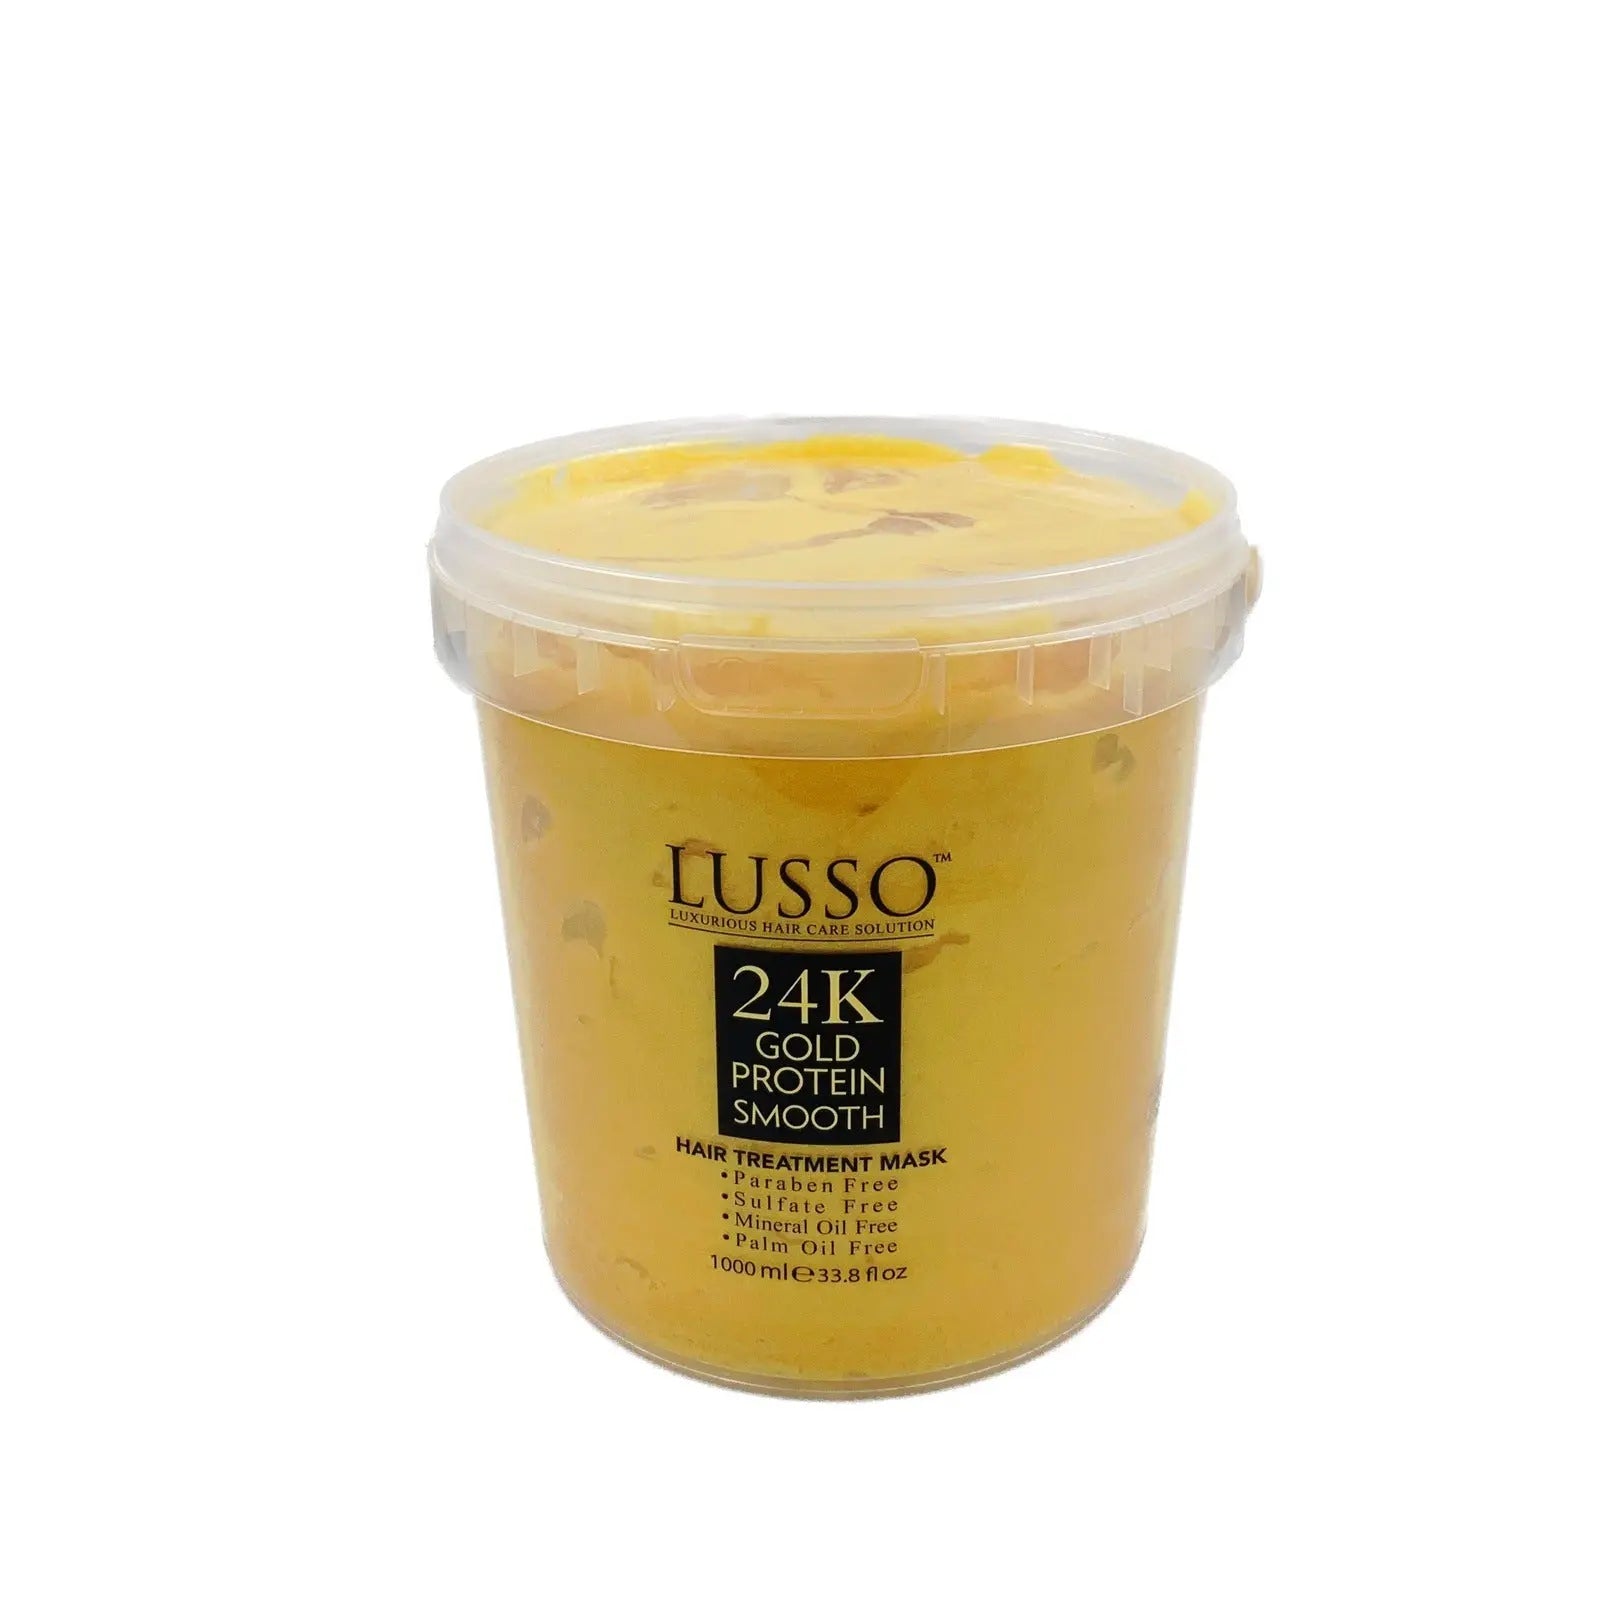 LUSSO 24K Gold Protein Smooth Hair Treatment Mask 1000 ML - JOLIE'S UAE